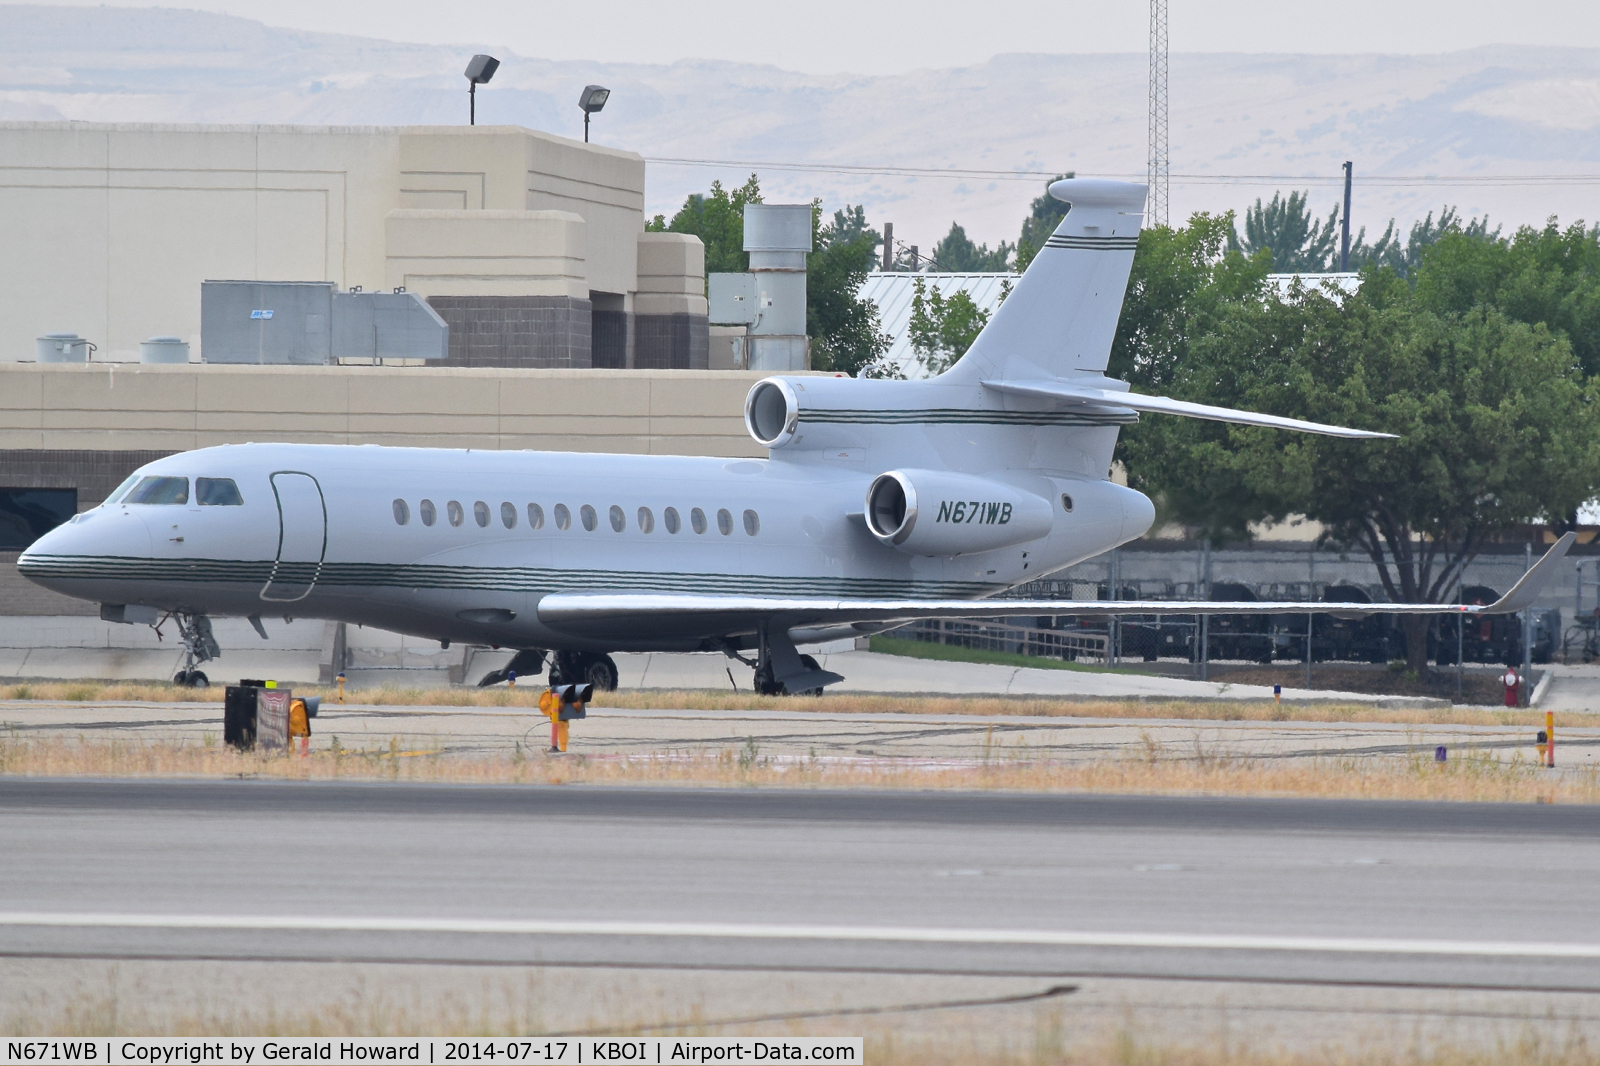 N671WB, 2008 Dassault Falcon 7X C/N 29, Taxiing out to RWY 10R.